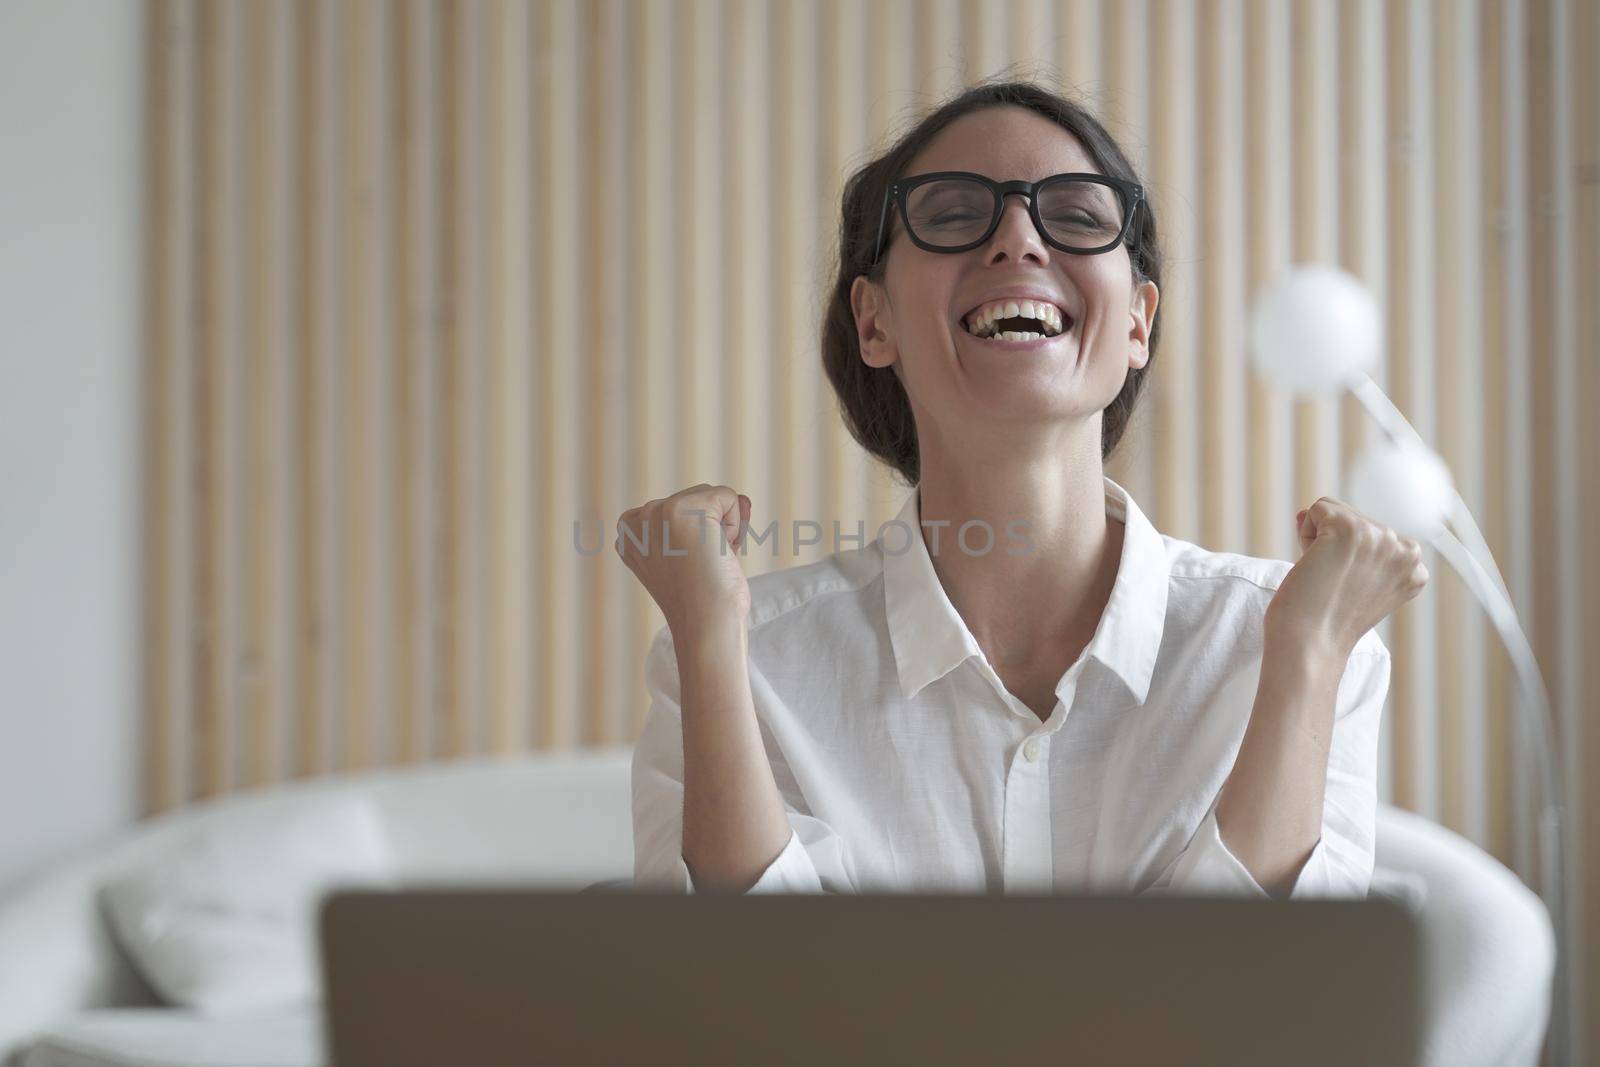 Excited latina woman freelancer clenched her fists with joy and delight with head raised up as if shouting hurray, celebrates joy of finished difficult business project. Remote work concept